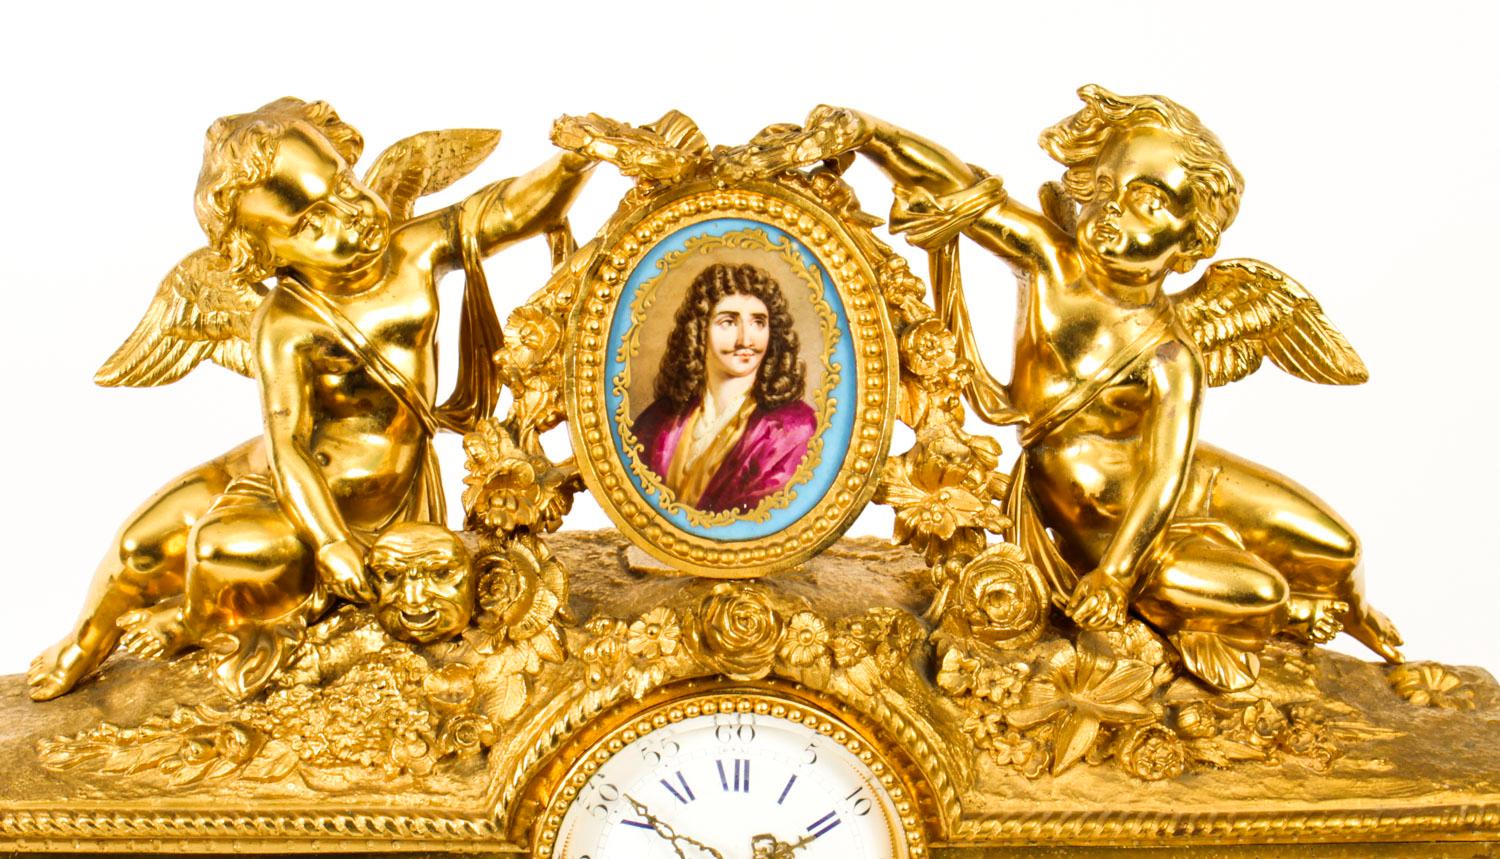 Antique French Gilt Bronze Clock with Portrait Plaque of Molière, 19th Century In Good Condition For Sale In London, GB